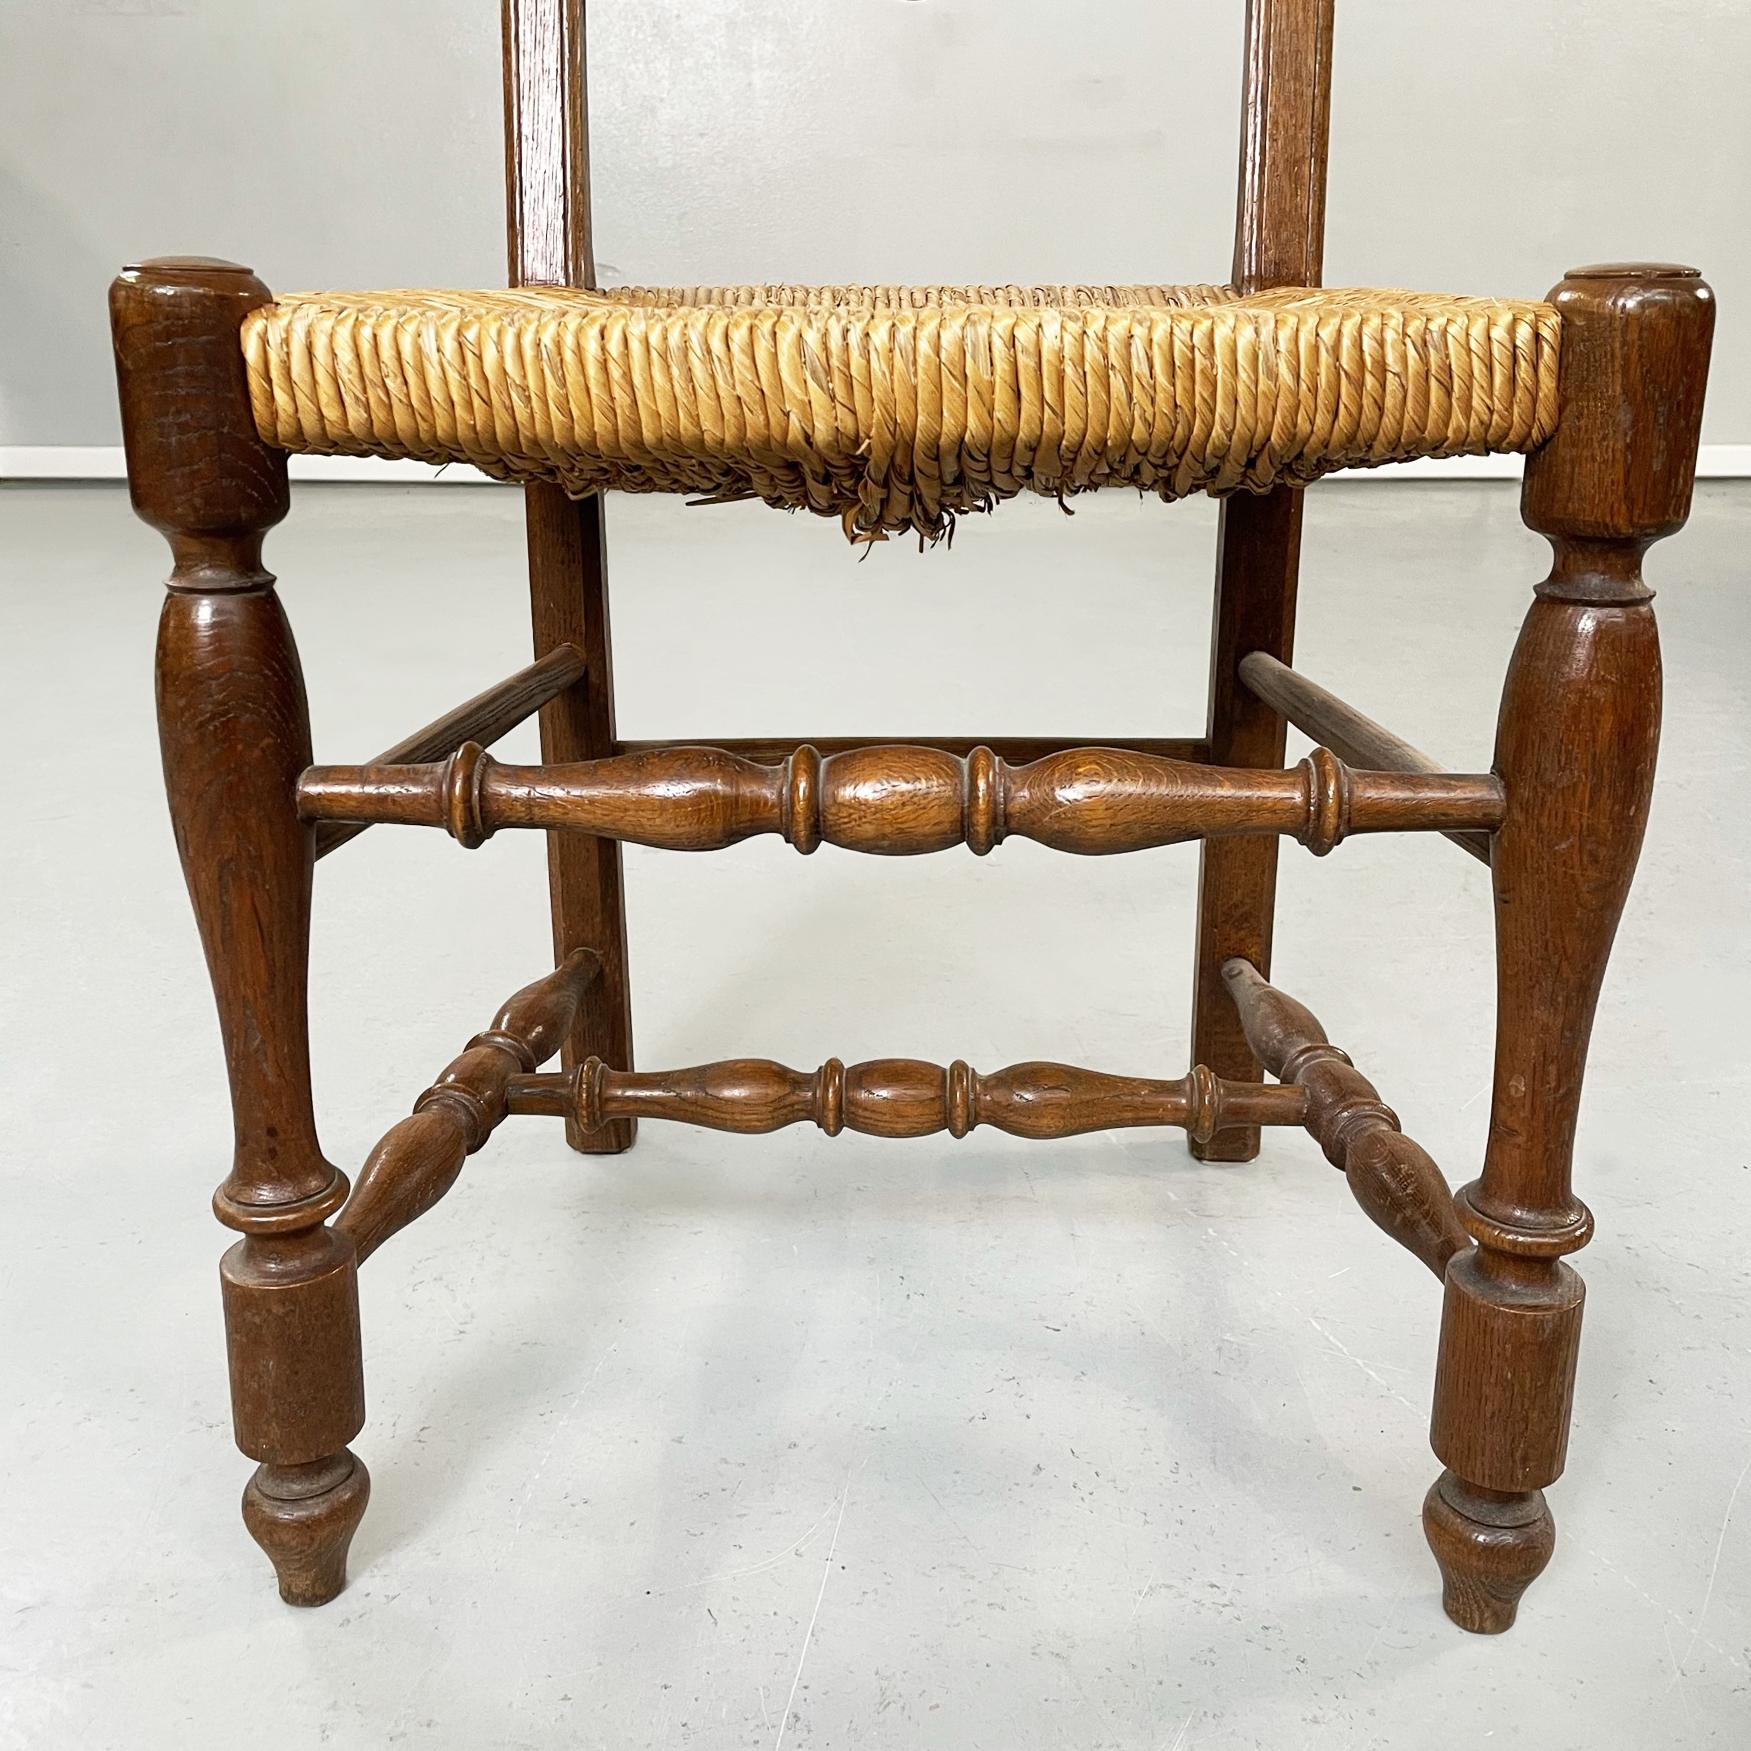 Italian Nineteenth Century Finely Crafted Wooden and Straw Chairs, Late1800s For Sale 1